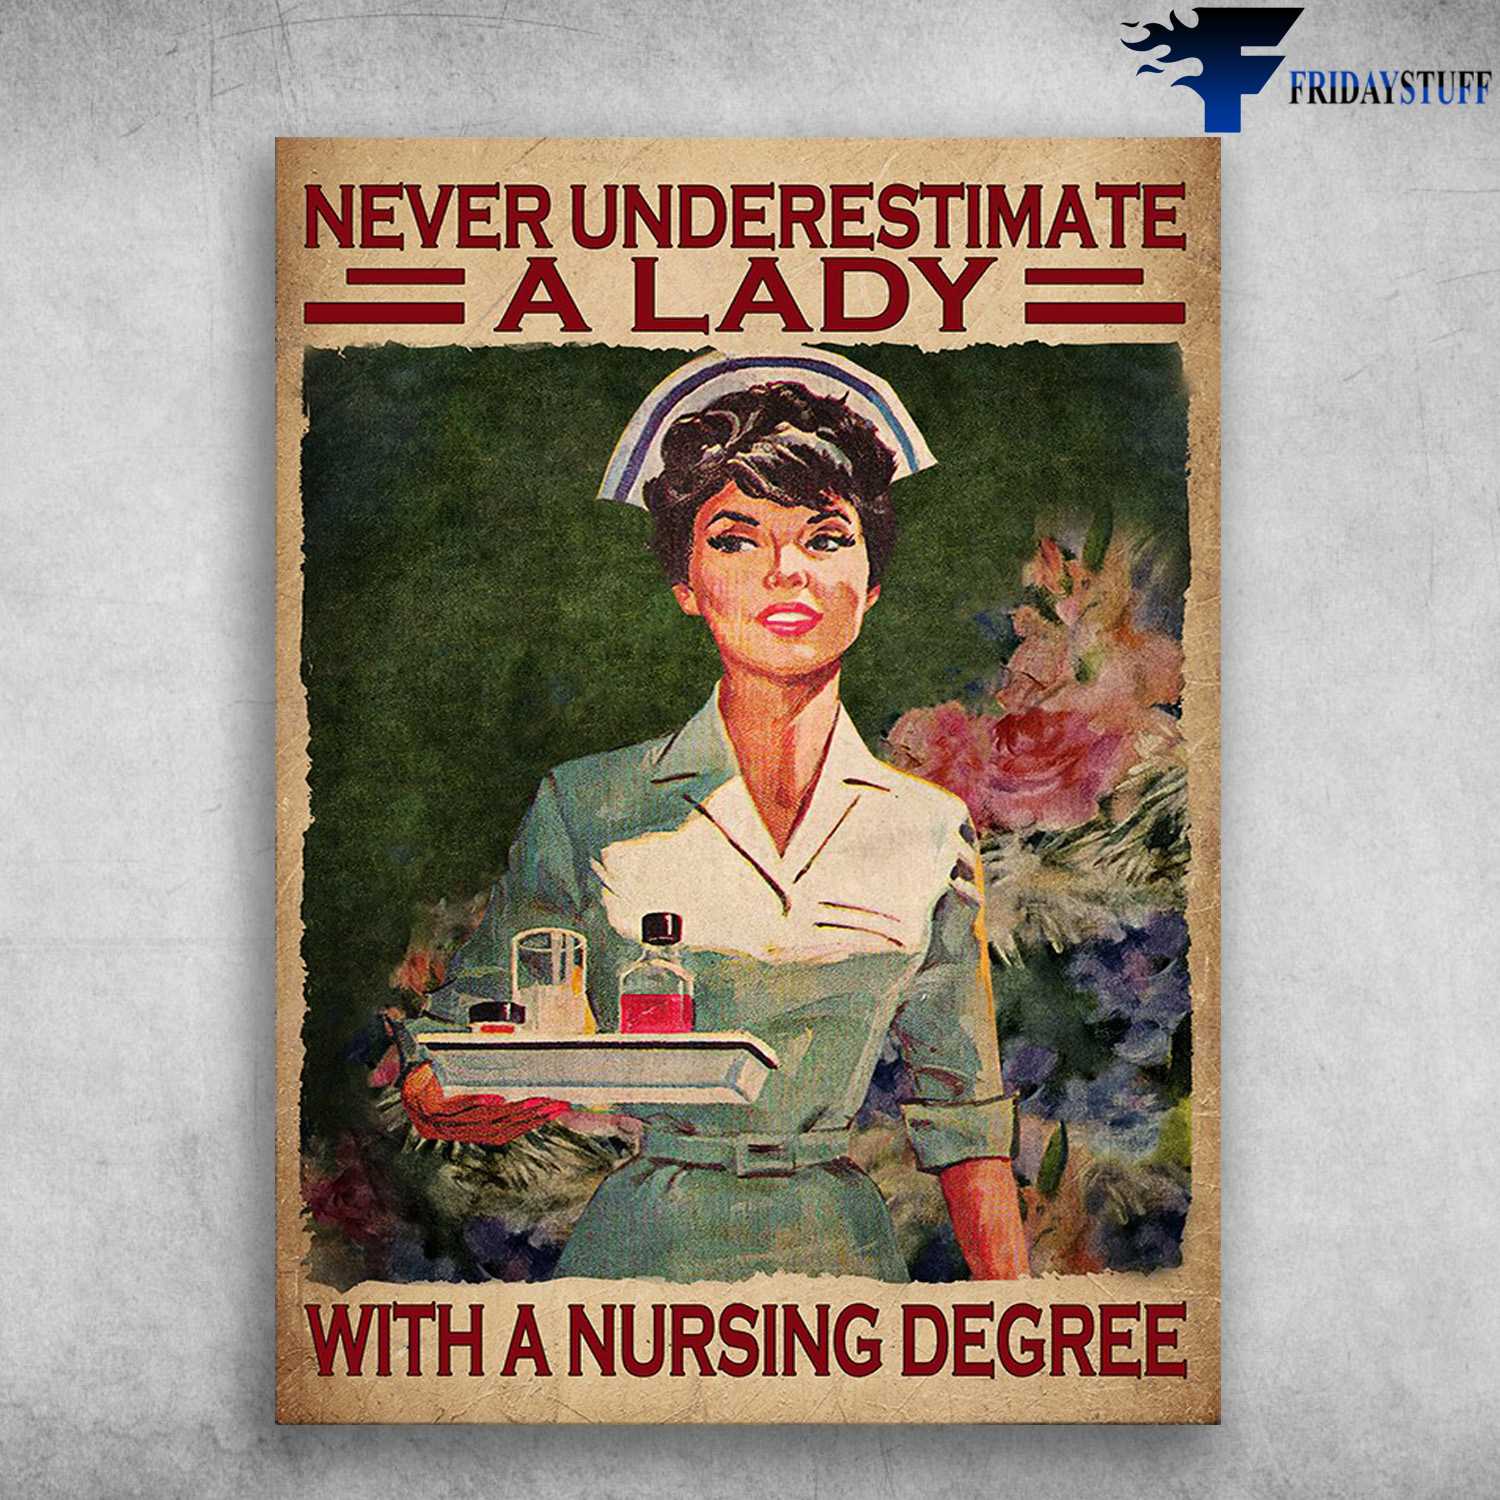 Nurse Poster - Never Underestimate A Lady, With A Nursing Degree